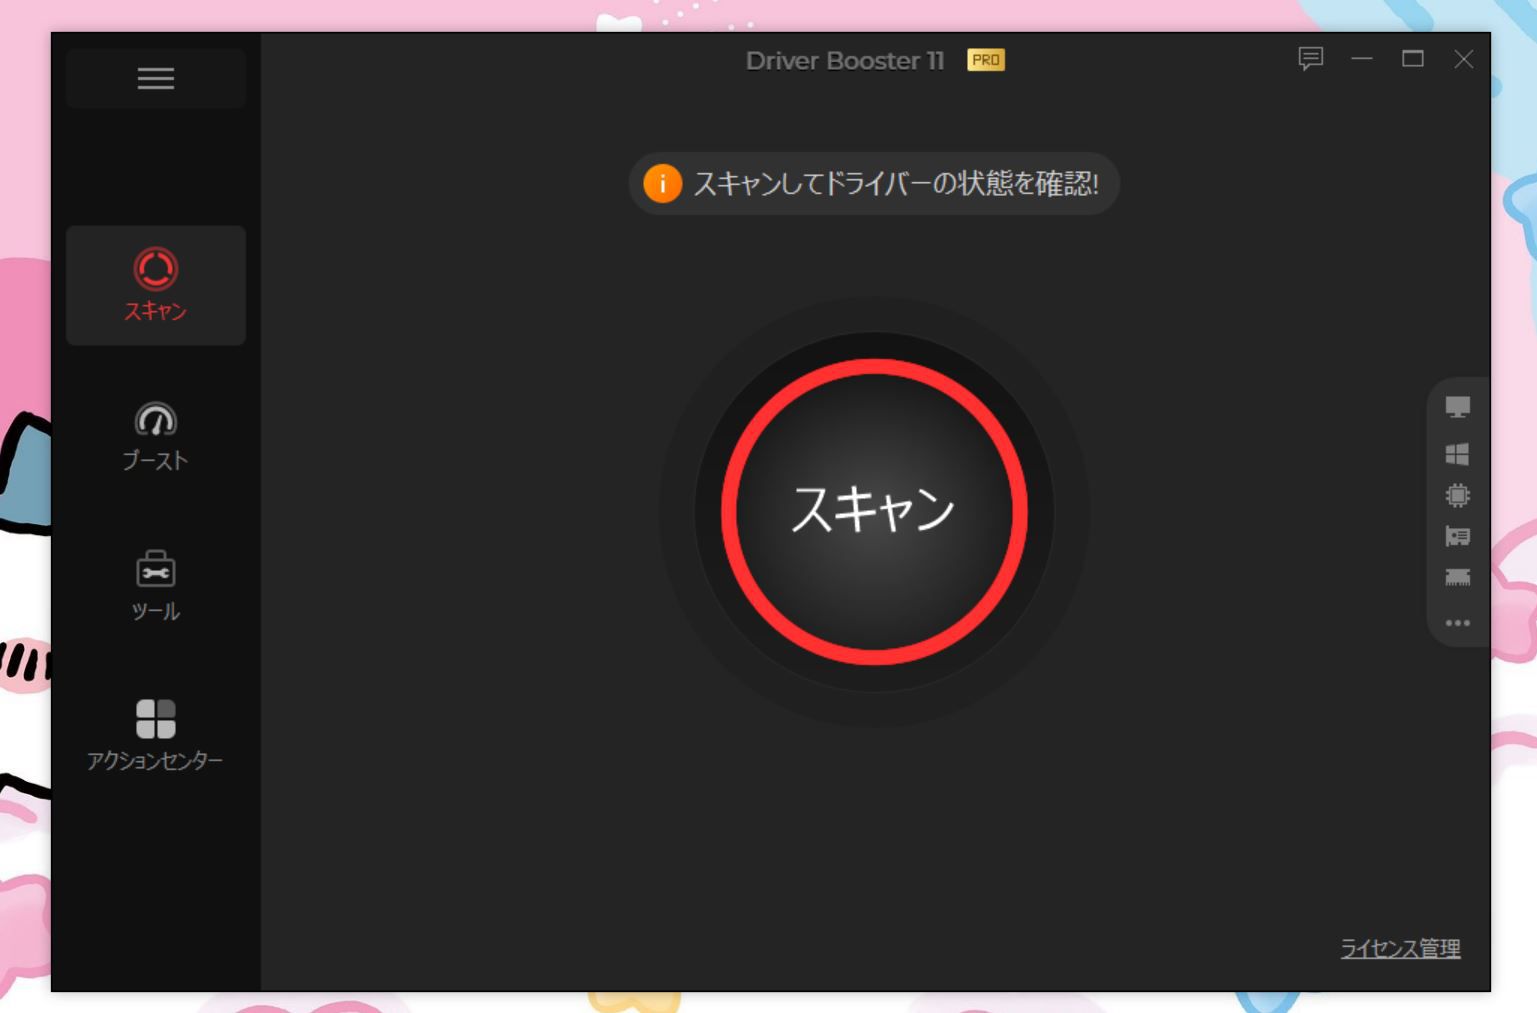 Driver Booster 11 PROの起動画面